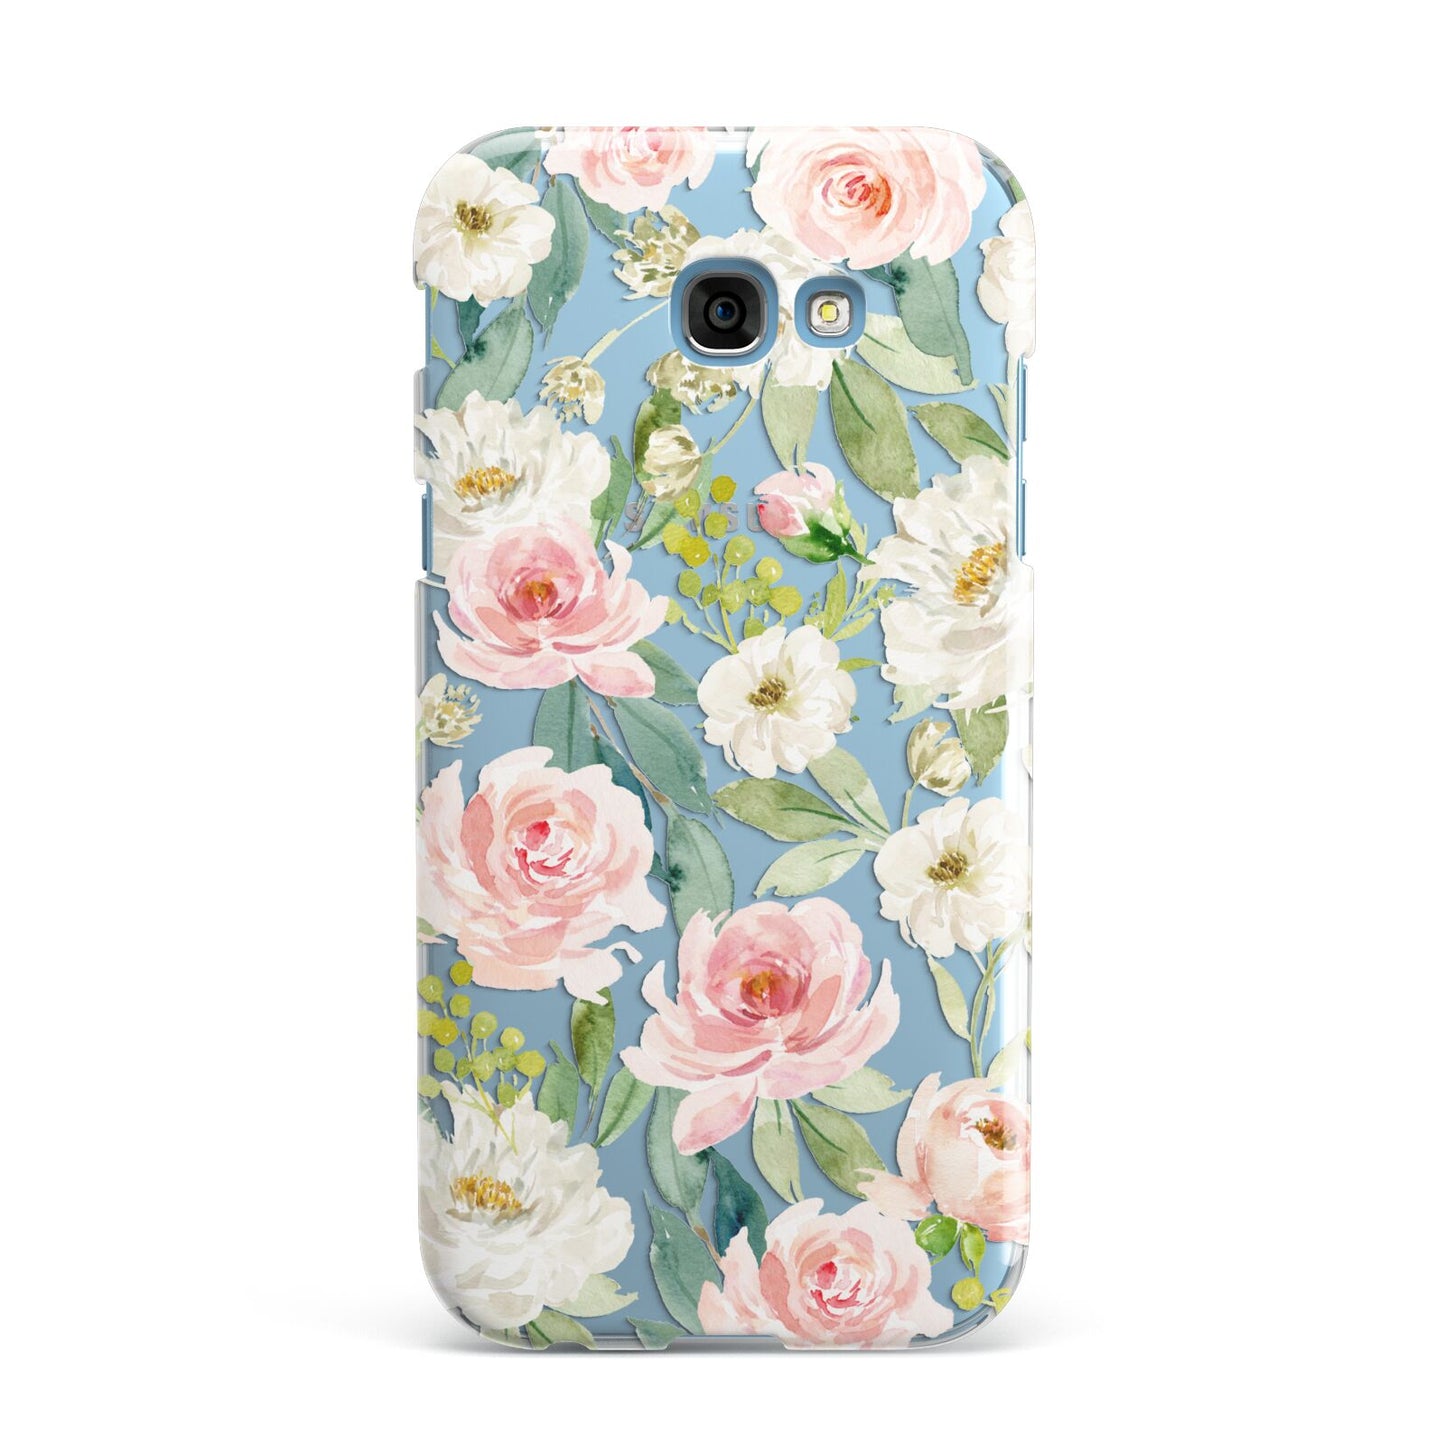 Watercolour Peonies Roses and Foliage Samsung Galaxy A7 2017 Case